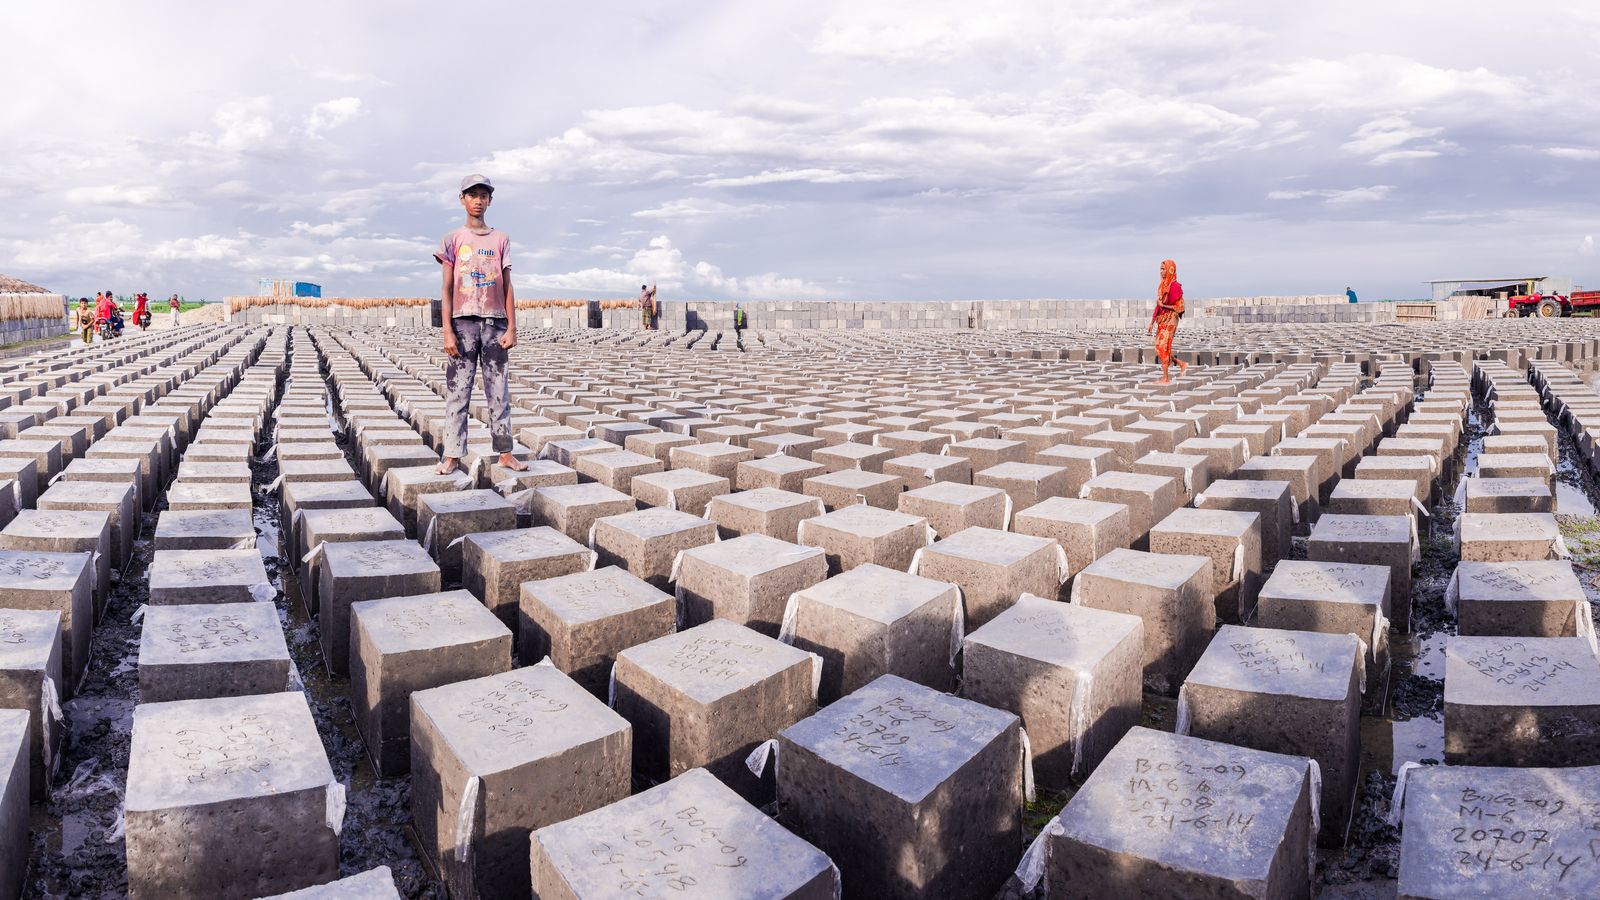 © Carrie and Eric Tomberlin - Locally-Produced Concrete Blocks to Reinforce Embankments, Sariakandi